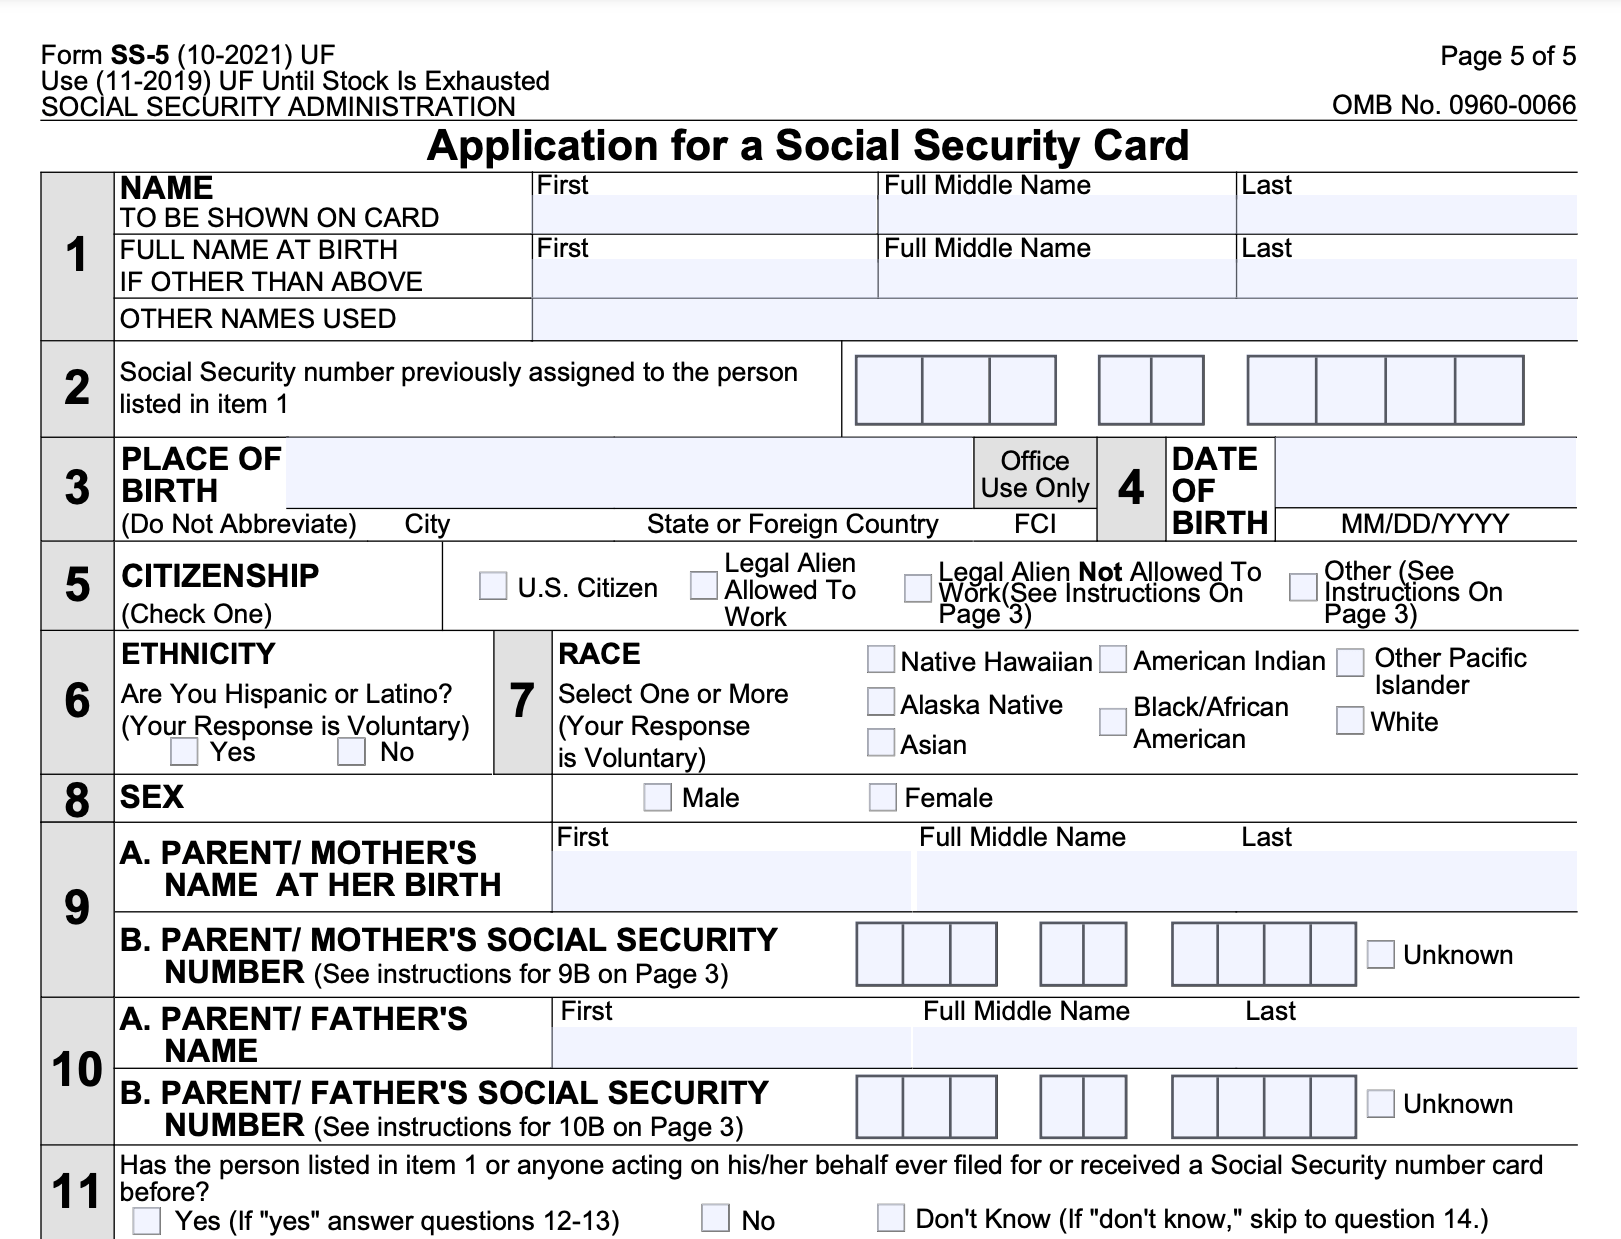 Social Security Number, Explained image image